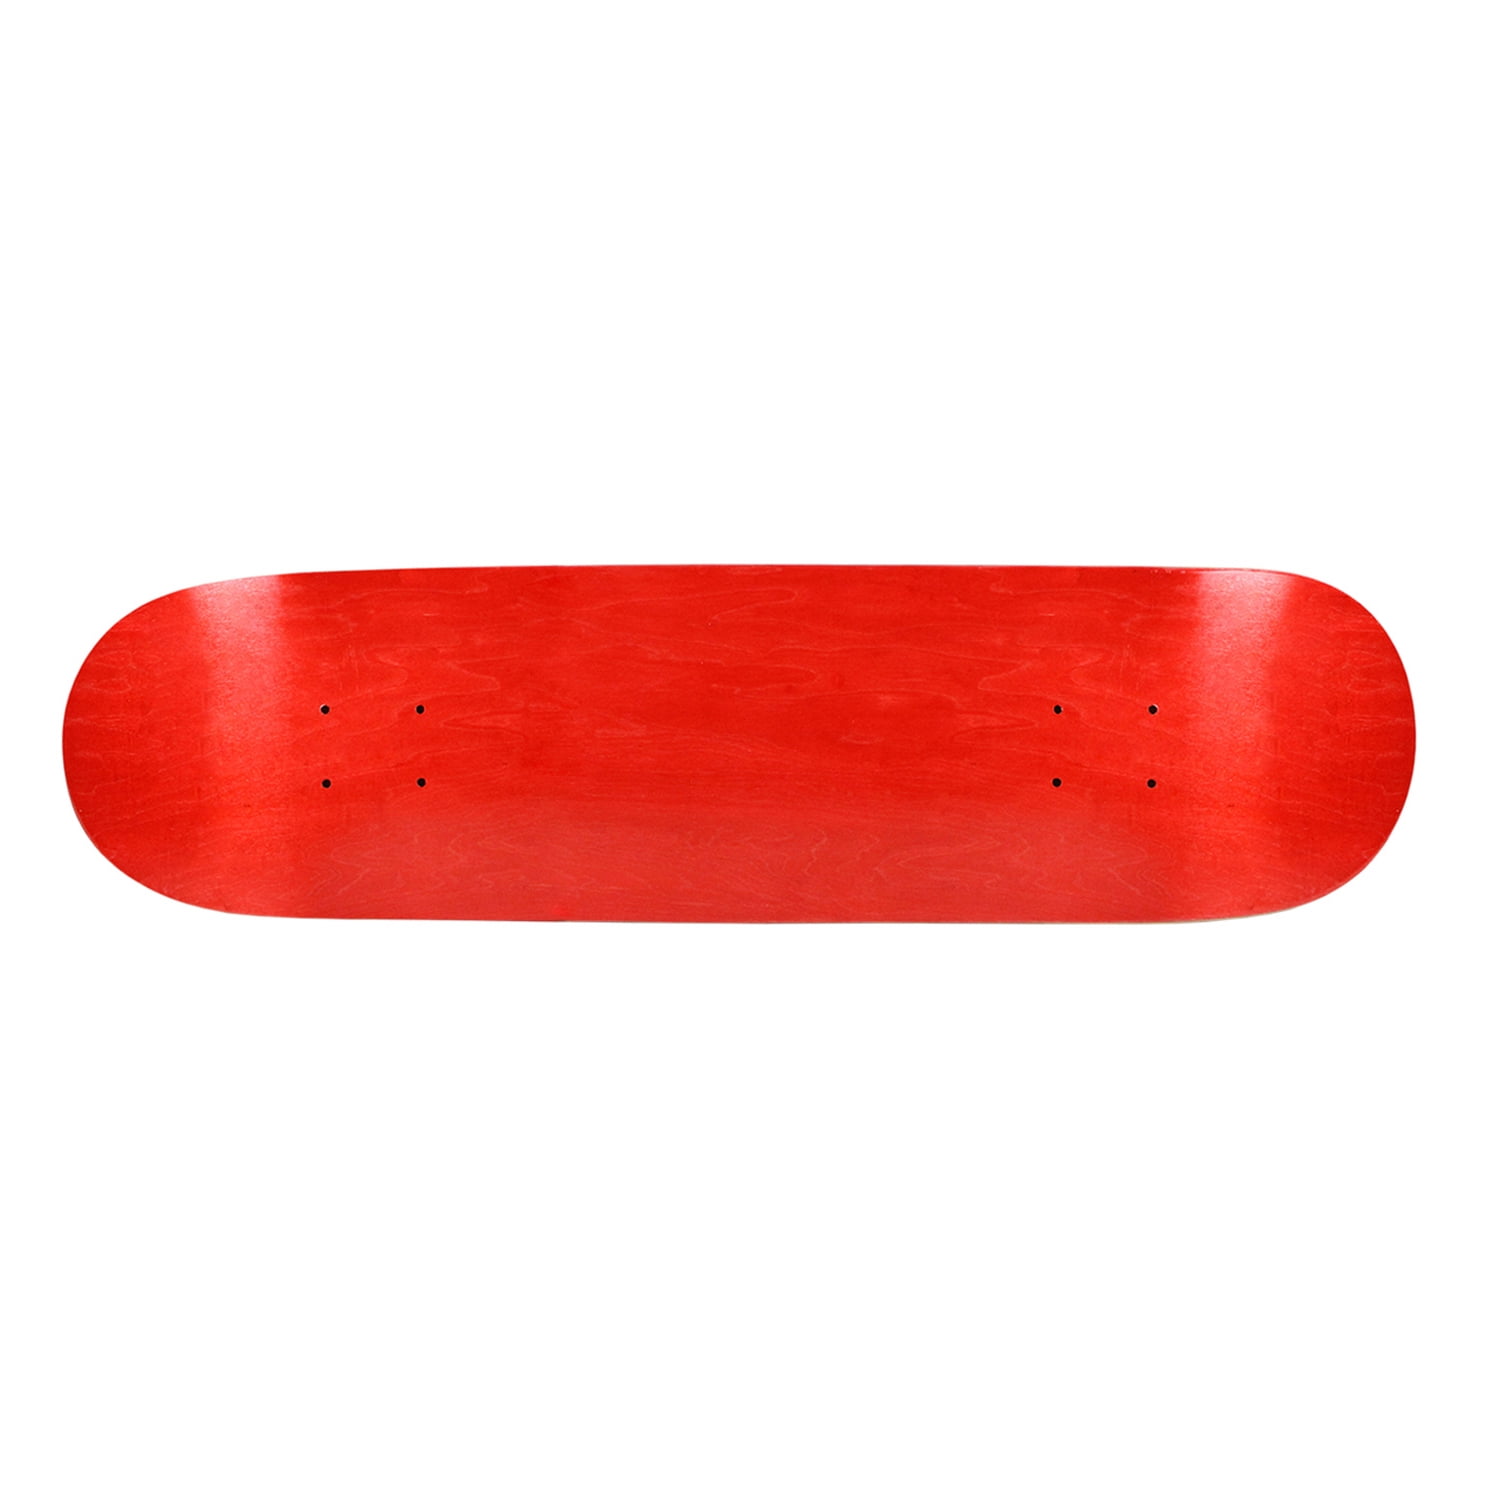 STAINED RED BLANK SKATEBOARD DECK 7.5" 